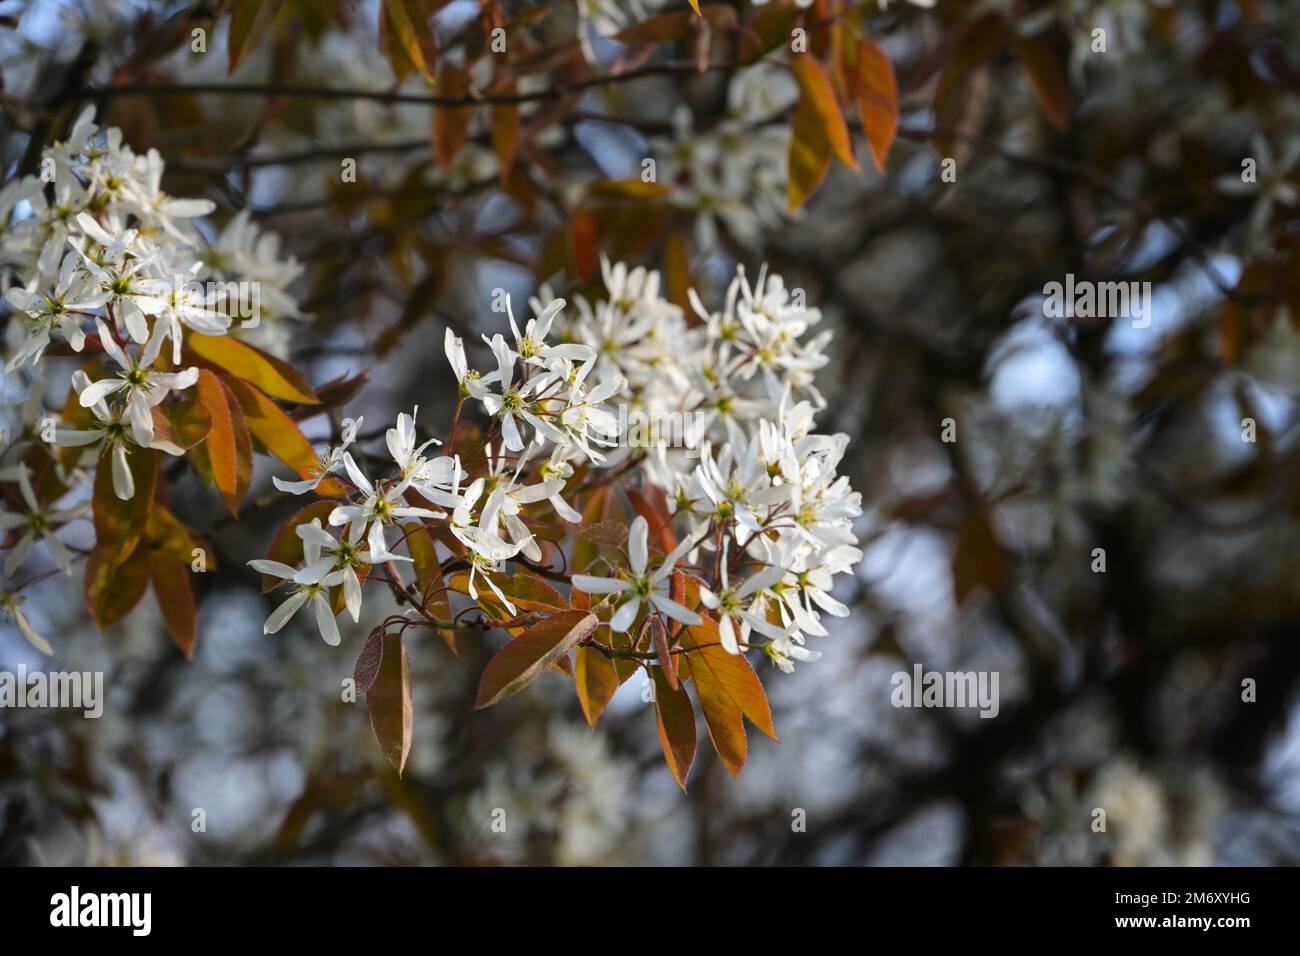 Amelanchier shrub with white flowers and copper colored foliage in spring, copy space, selected focus, narrow depth of field Stock Photo